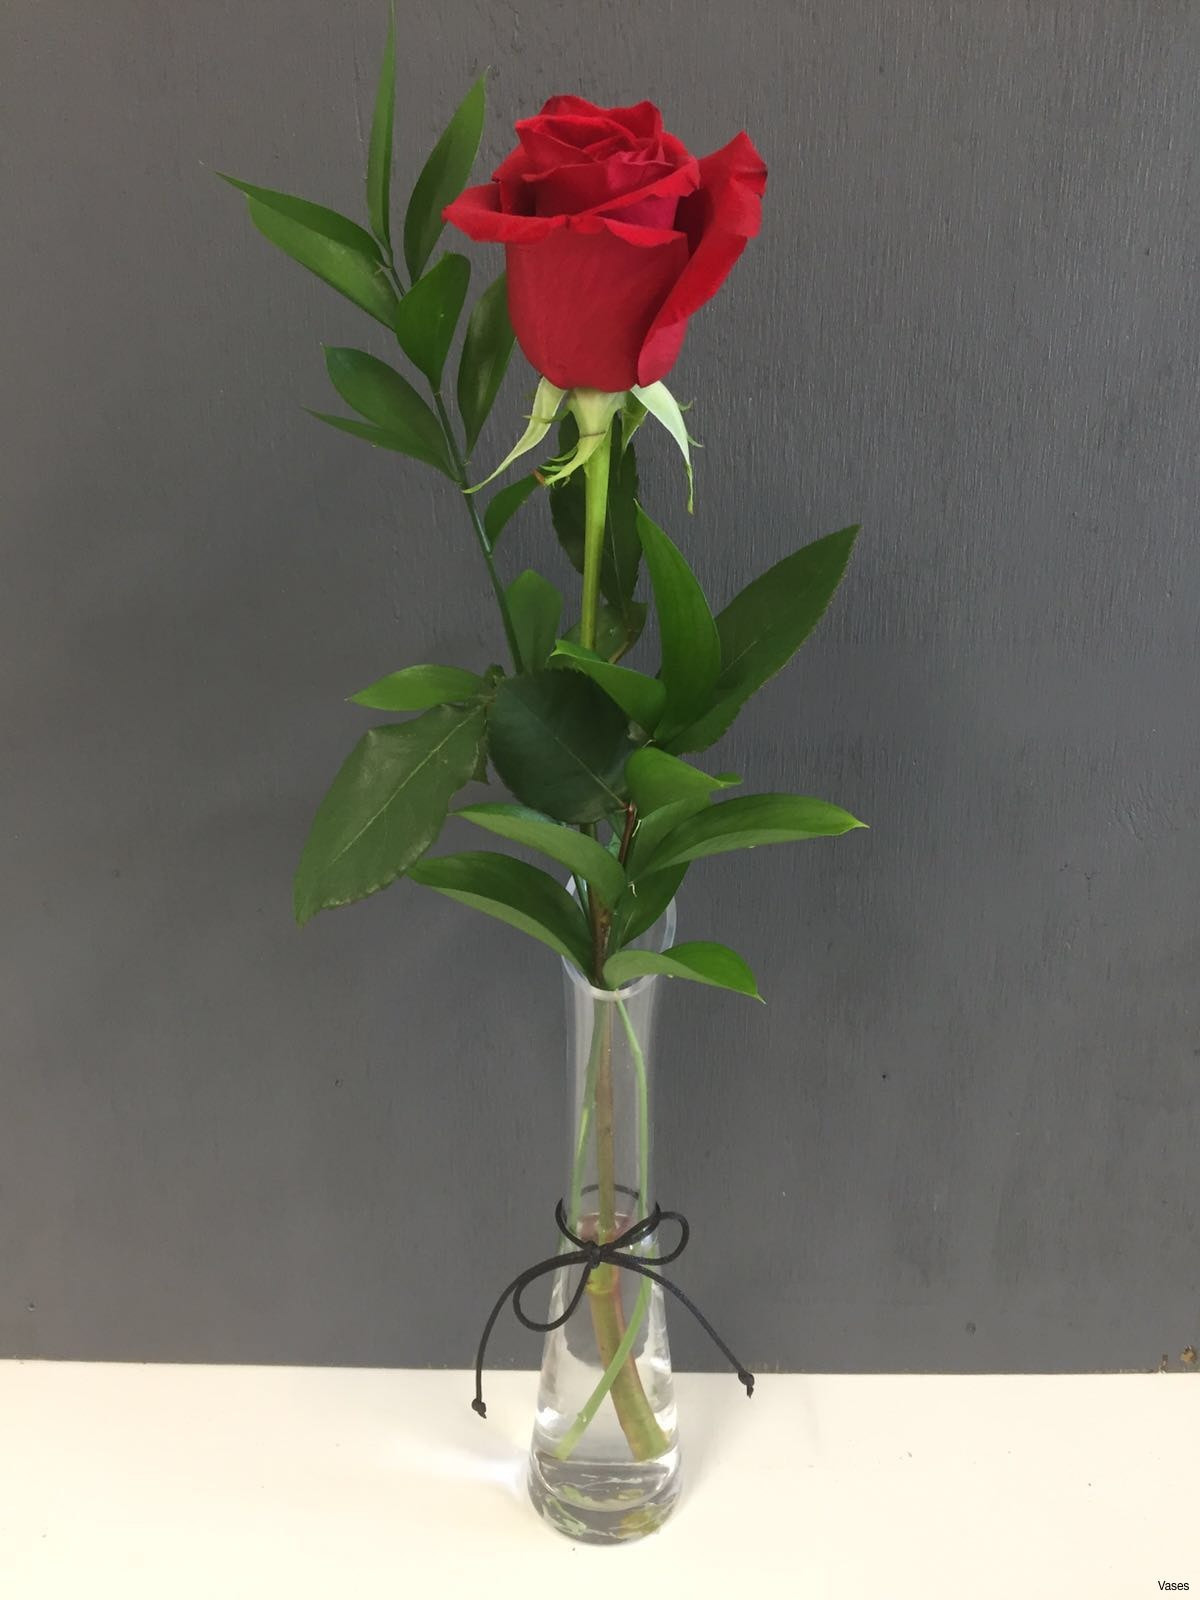 15 Spectacular Rustic Wooden Vases Uk 2024 free download rustic wooden vases uk of single flower vase photos simple wedding table decorations awesome in single flower vase images roses red in a vase singleh vases rose single i 0d invasive